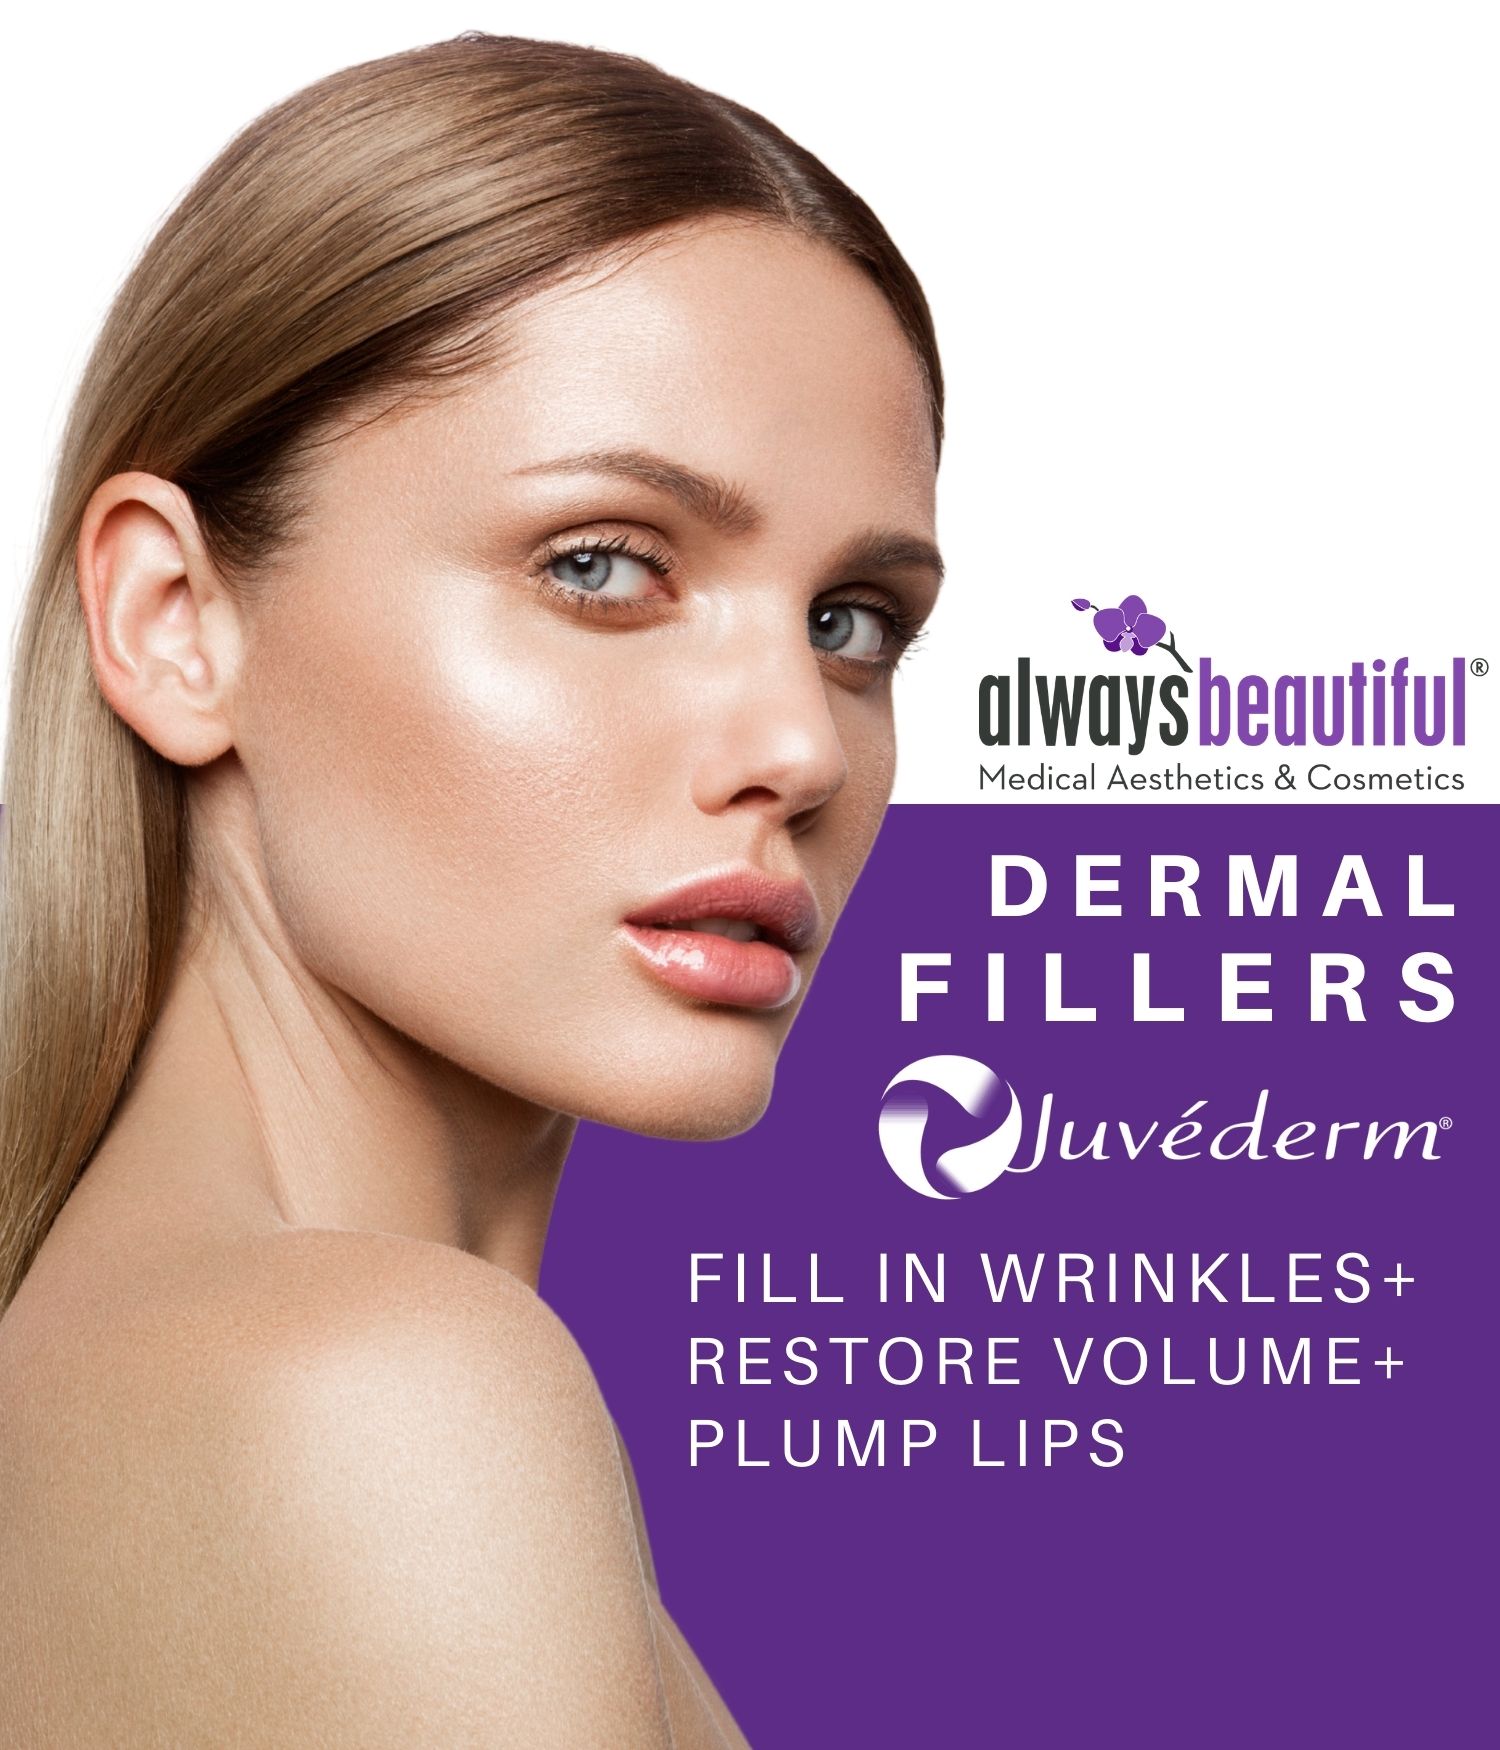 Woman with youthful and natural results from juvederm dermal fillers treatment.